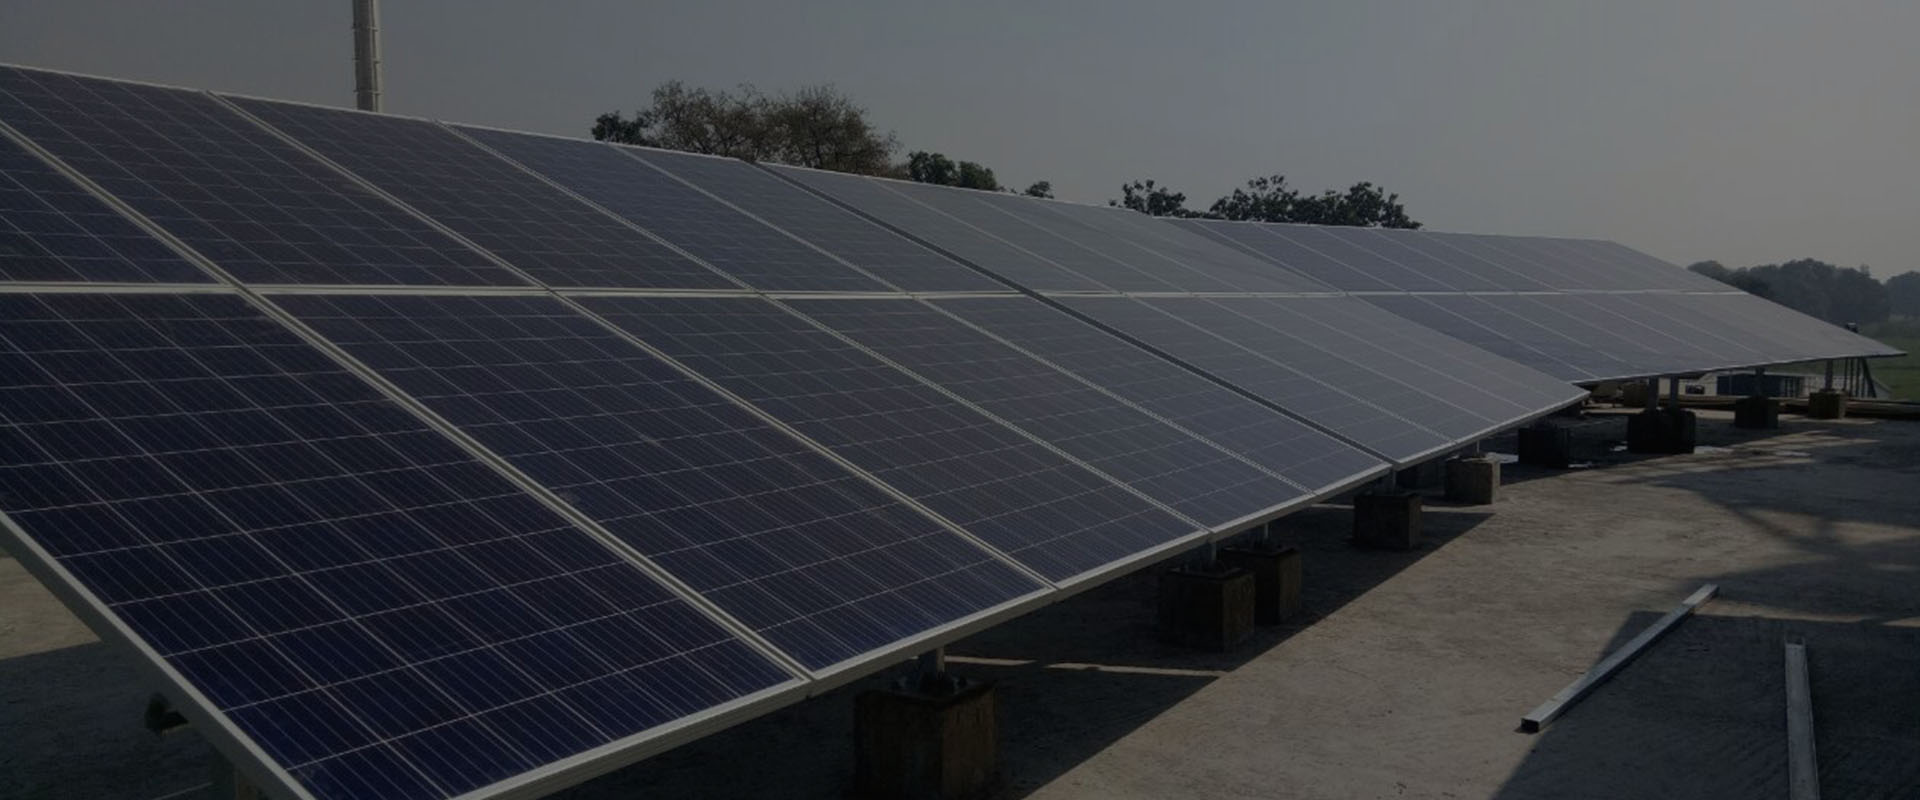 170KWp Rooftop Grid tied solar power plant : Akshay Patra Foundation, VRINDVAN and Lucknow